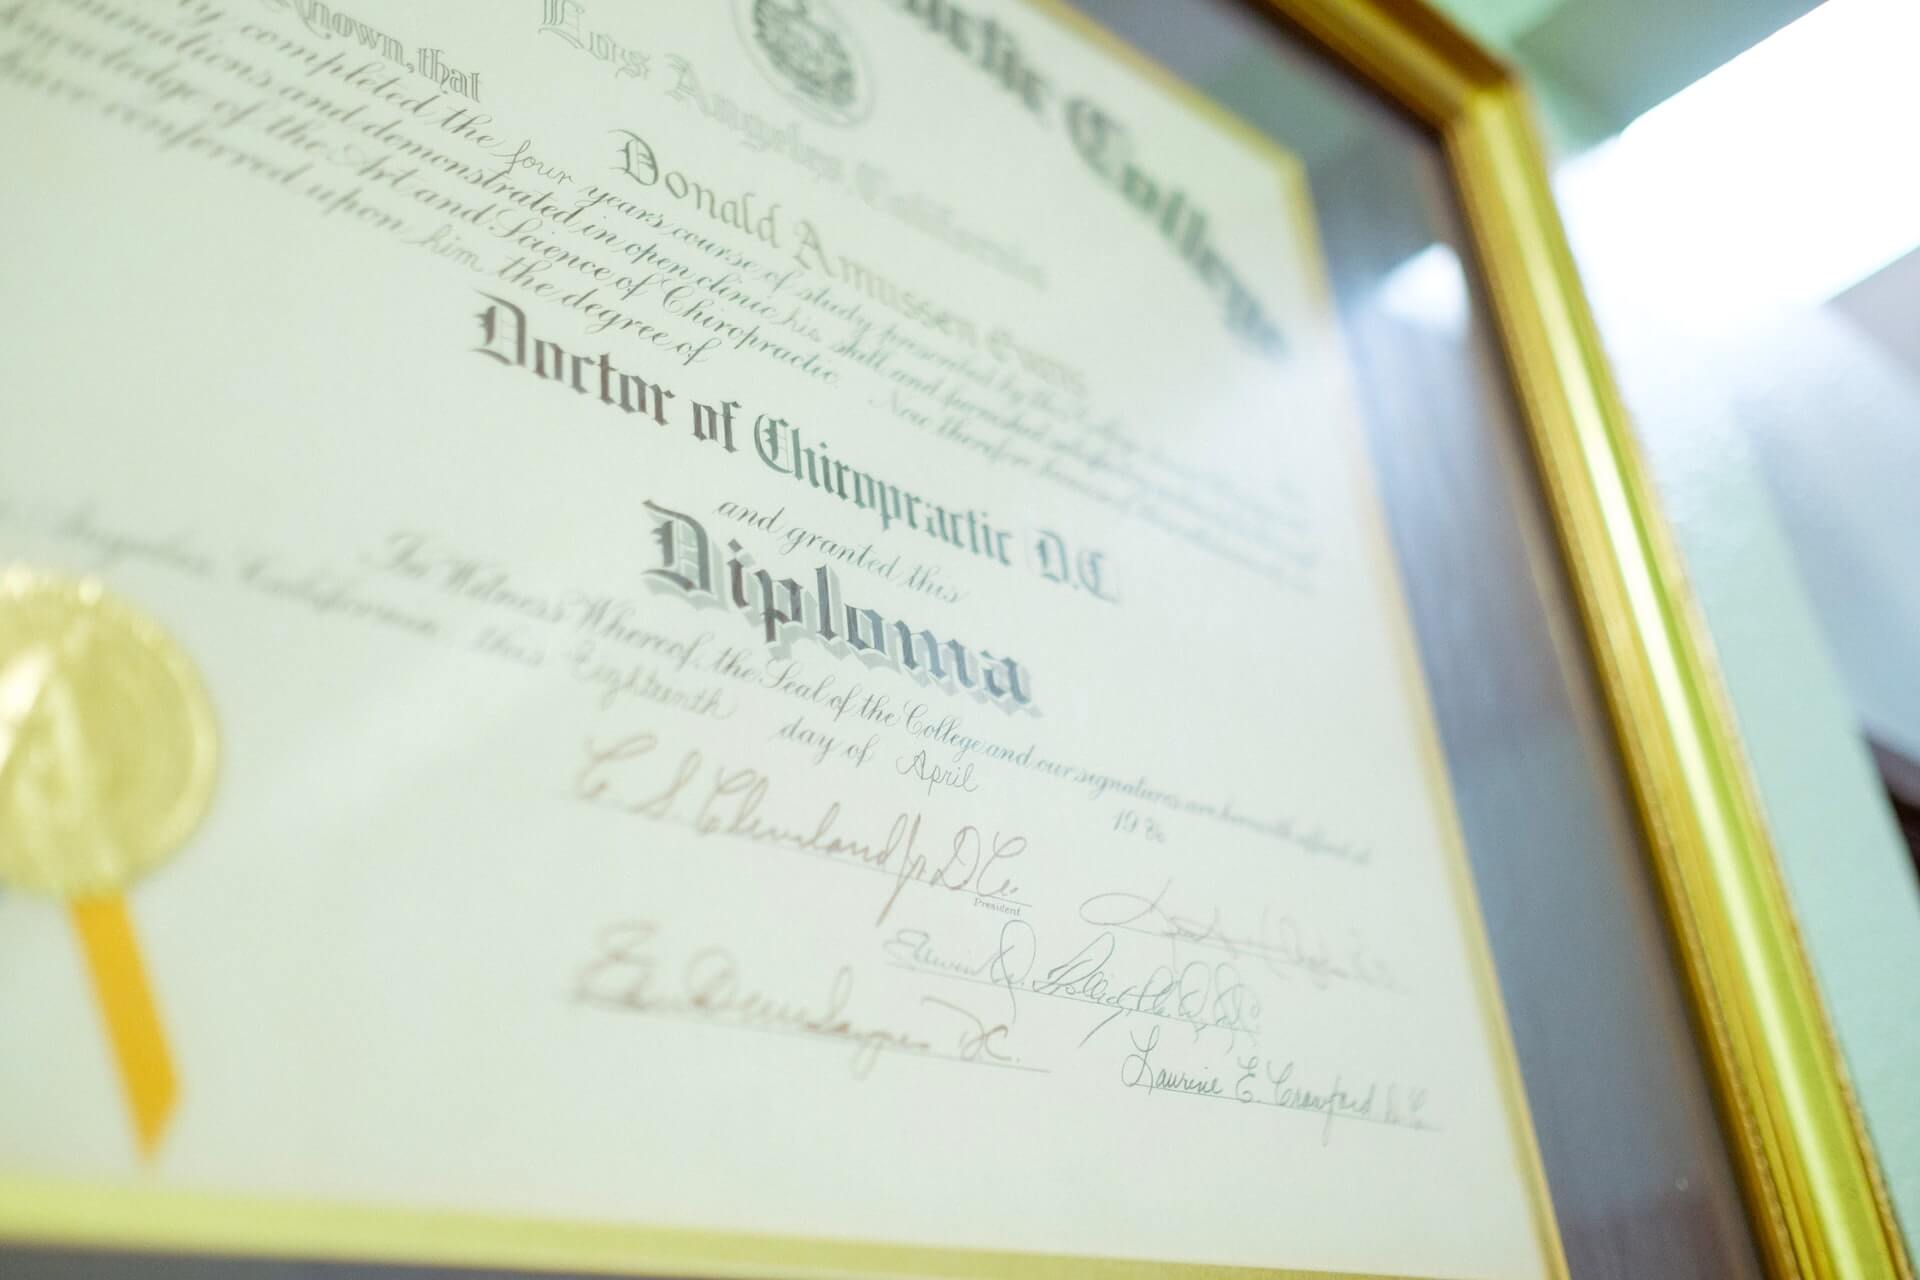 Diploma for Doctor of Chiropractic